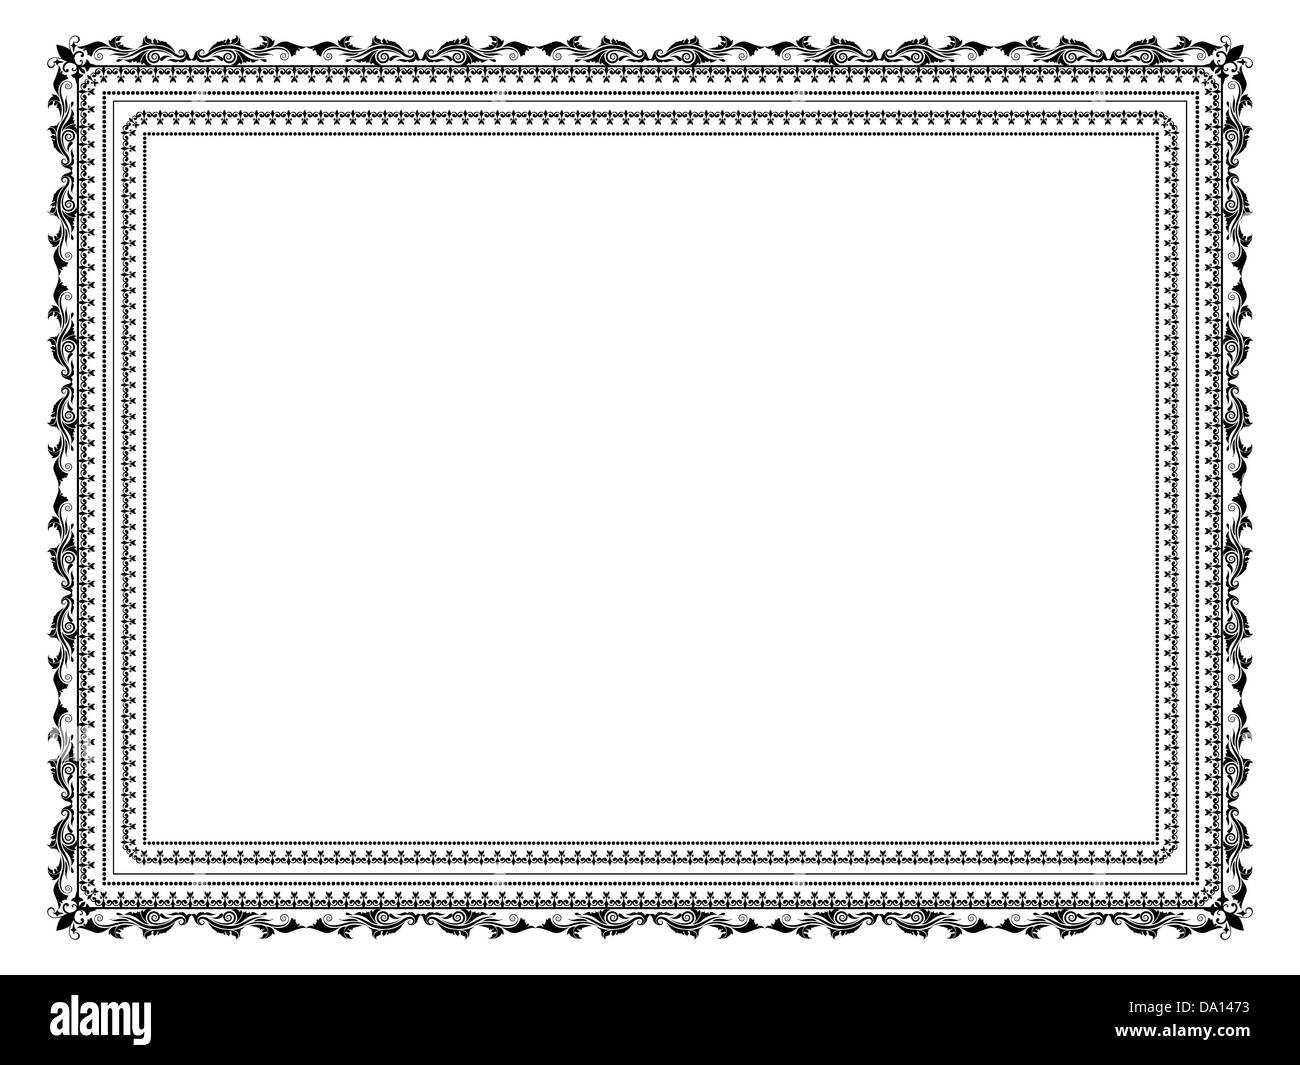 Decorative frame in black and white Stock Photo - Alamy